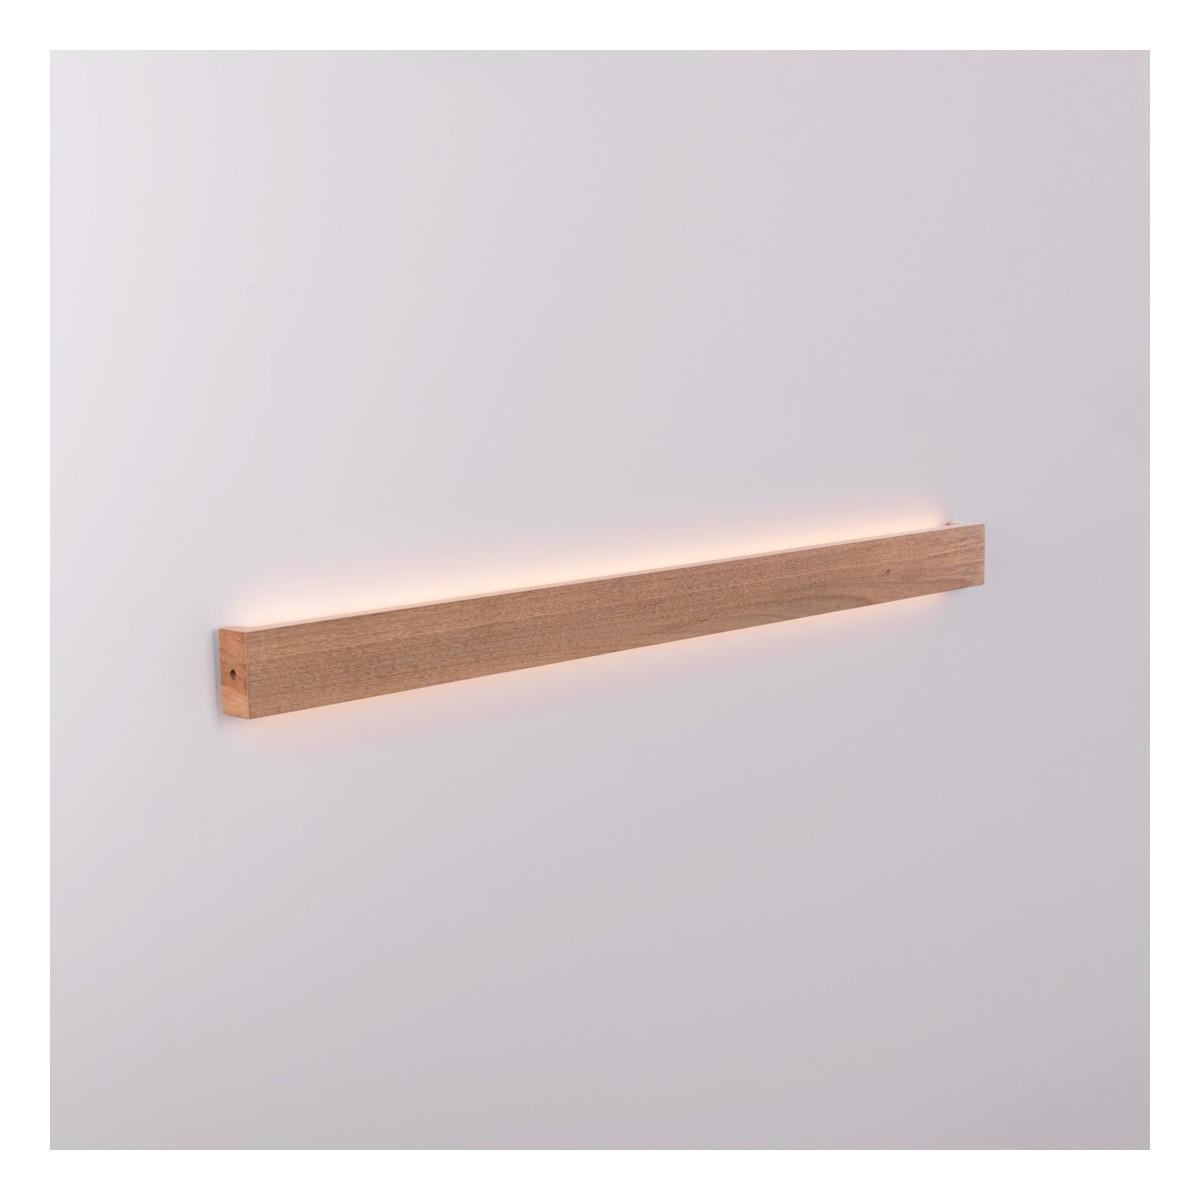 Aplique de pared lineal madera "Wooden" - Dimmable - 26W - 100cm - Driver Philips